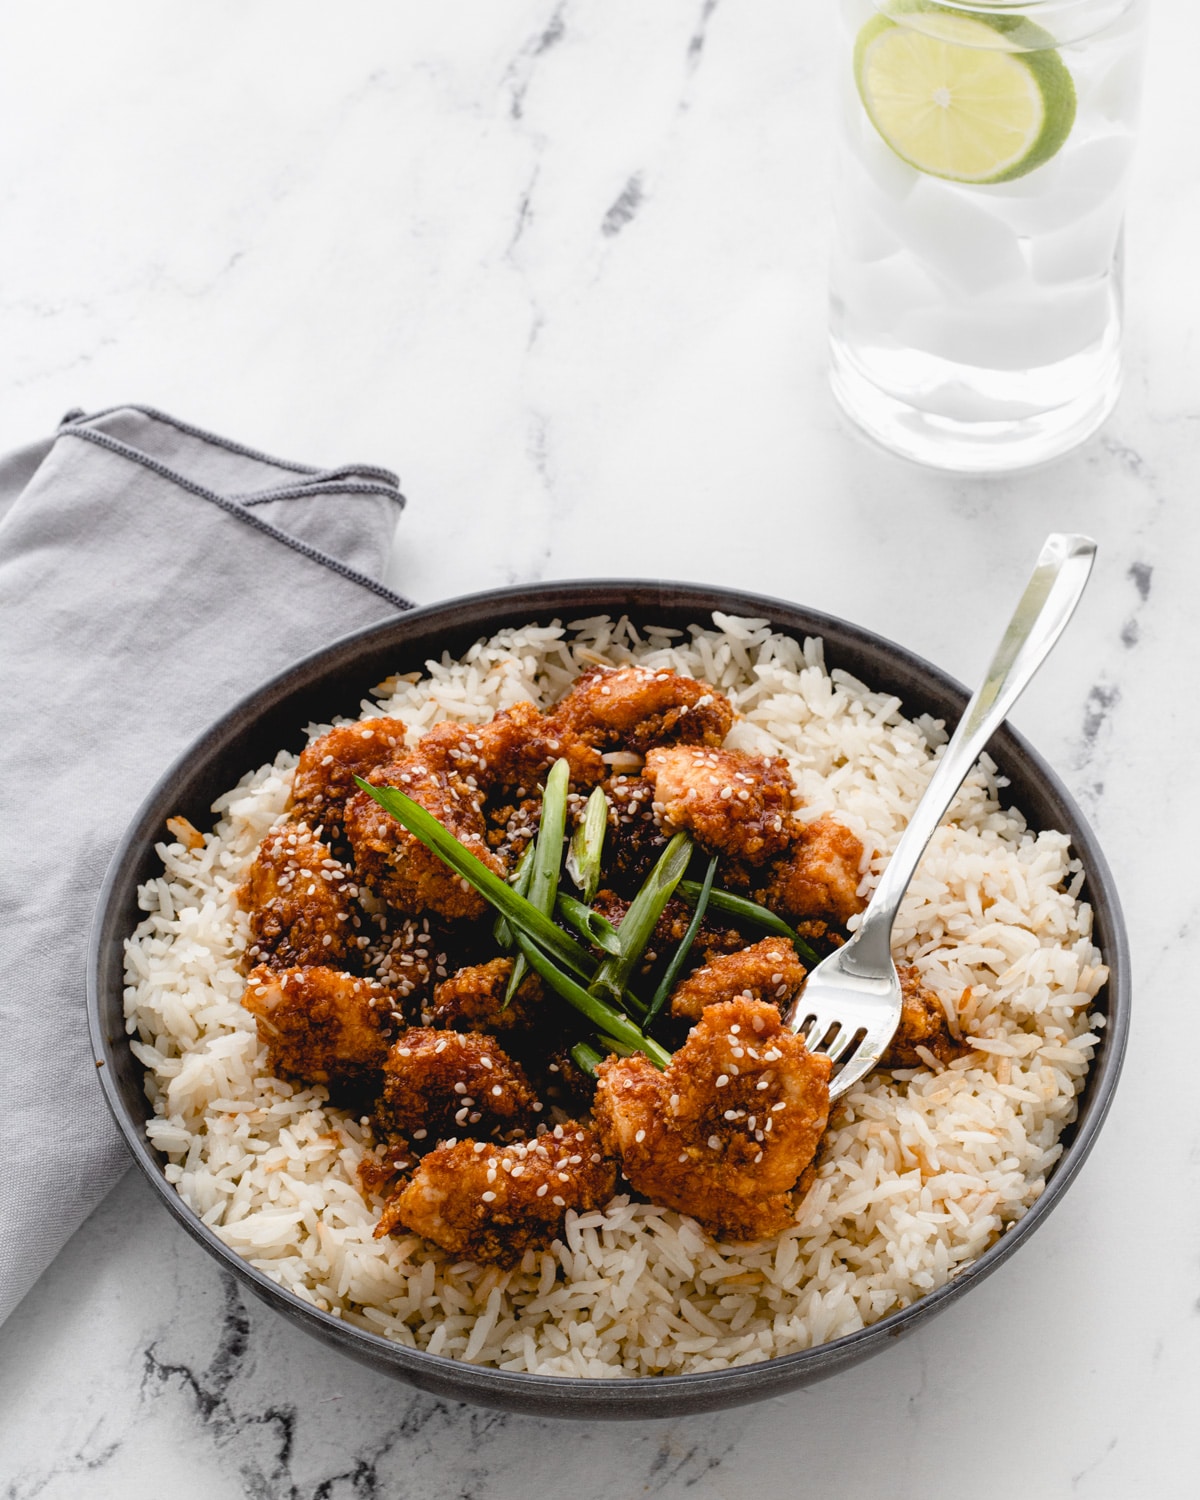 Bowl of sticky garlic chicken bites on rice, topped with green onions.